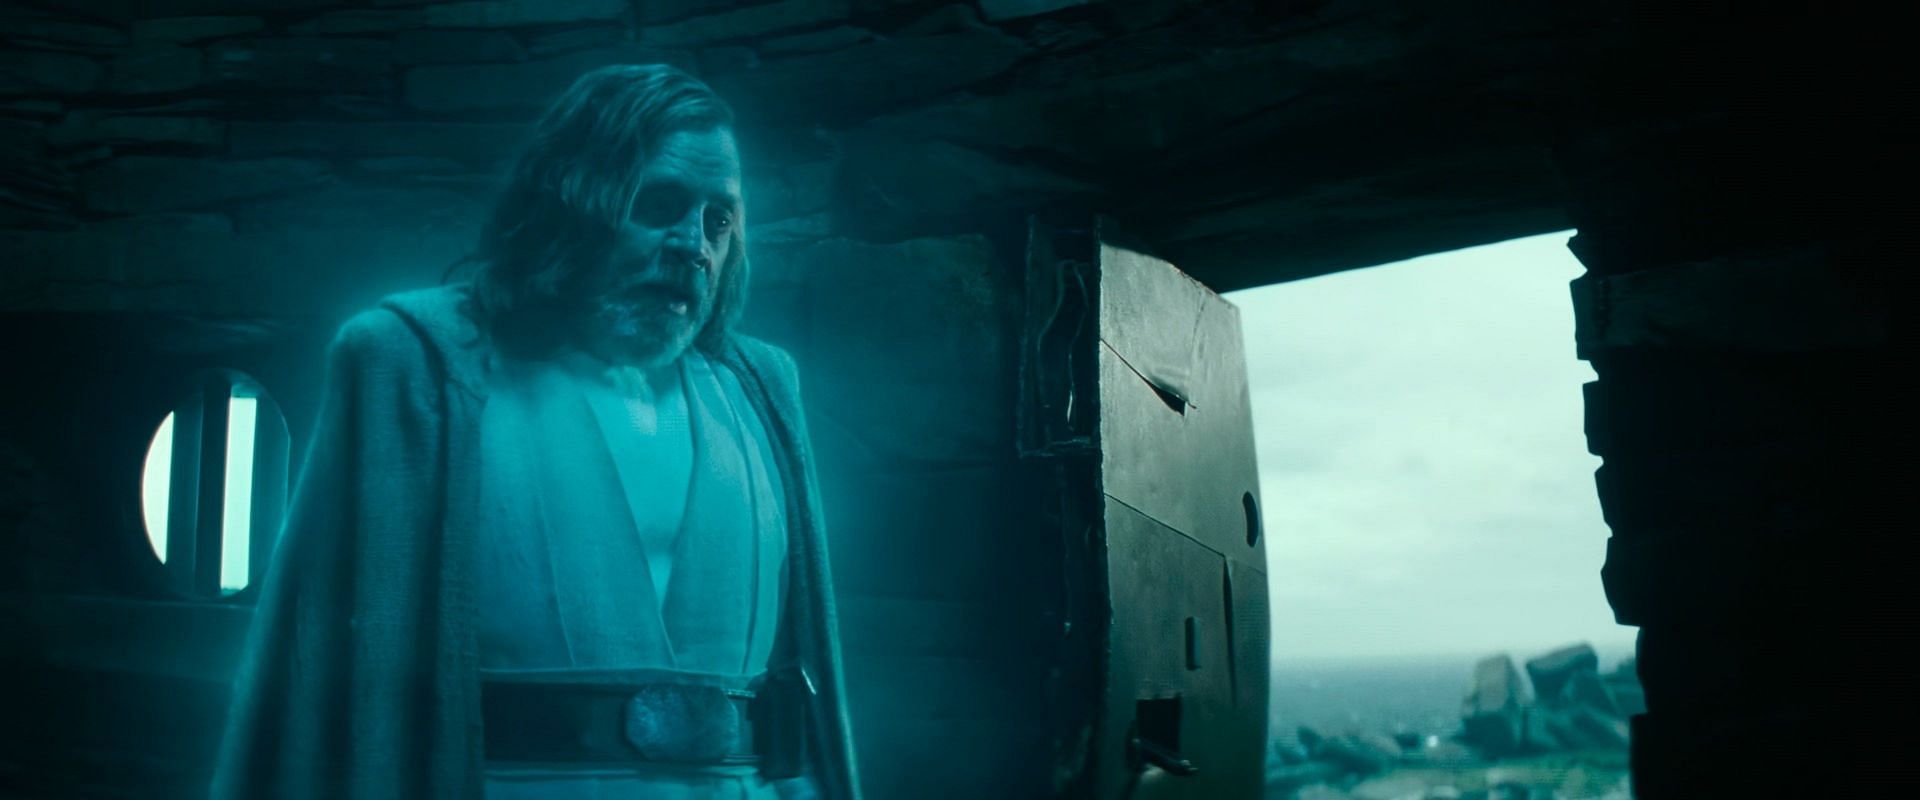 Rey embraces Luke Skywalker's legacy to forge a New Jedi Order, confirms Lucasfilm president (Image via Lucasfilm)